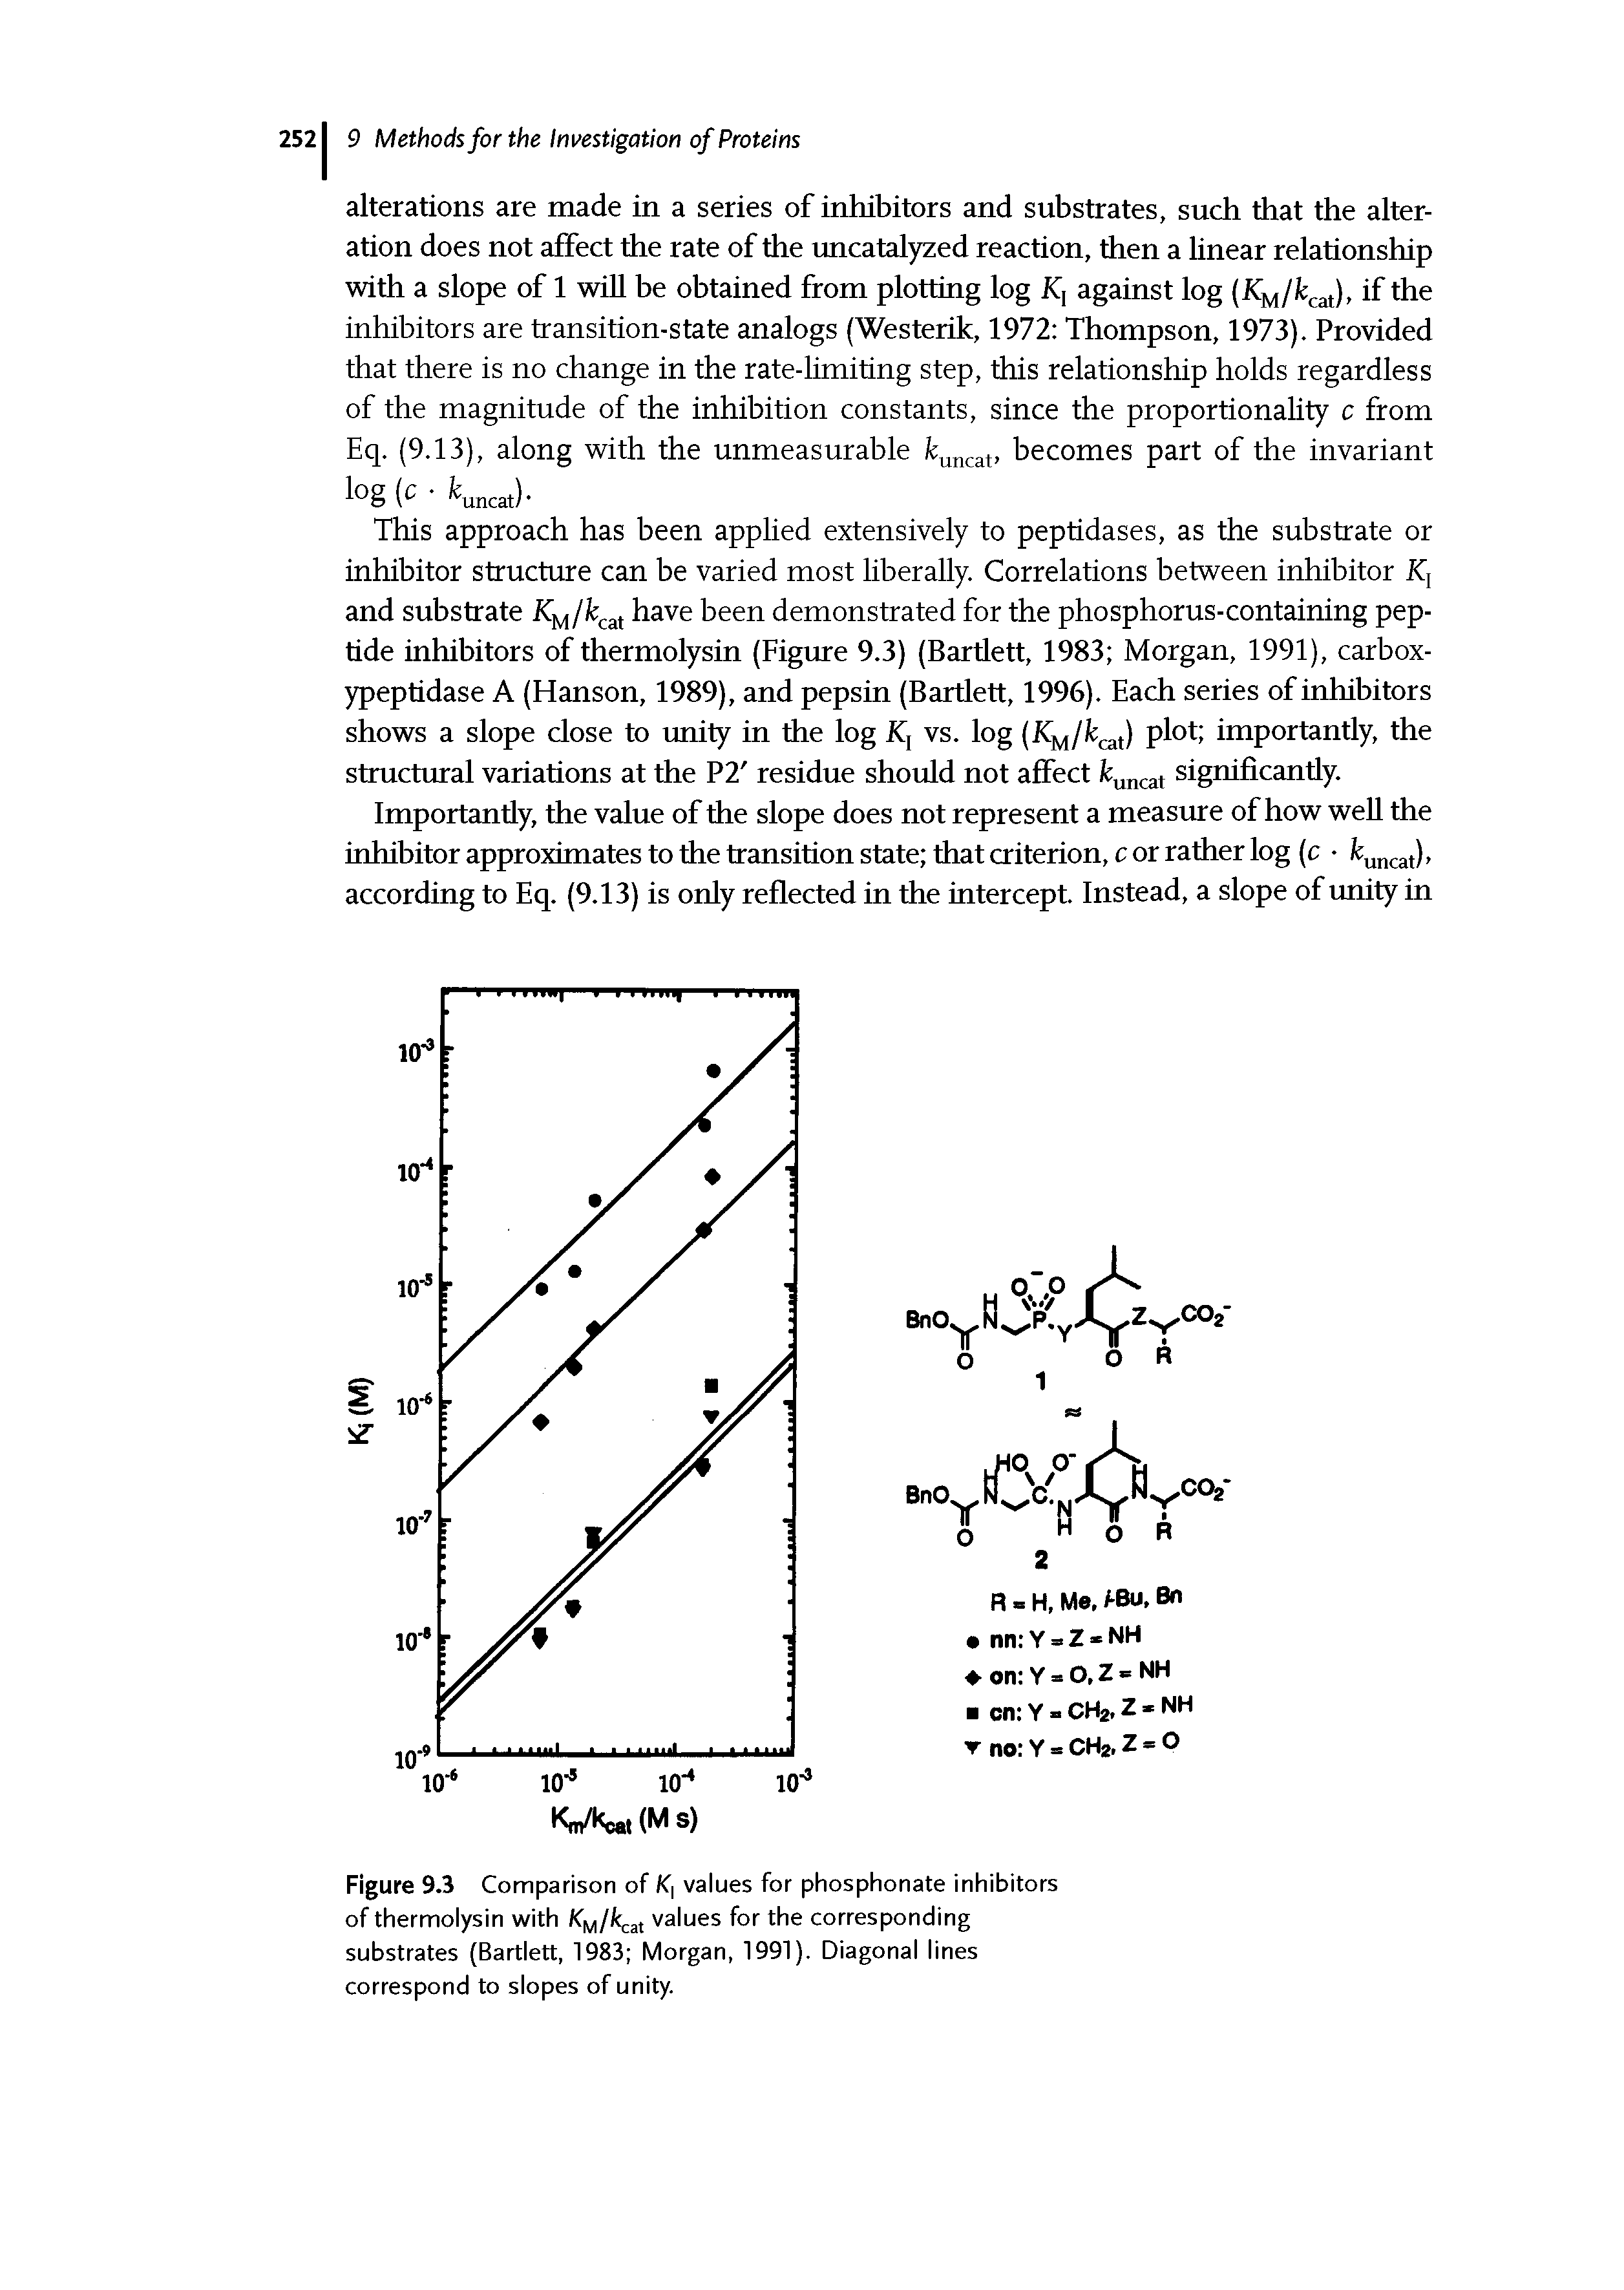 Figure 9.3 Comparison of K, values for phosphonate inhibitors of thermolysin with Kulkcat values for the corresponding substrates (Bartlett, 1983 Morgan, 1991). Diagonal lines correspond to slopes of unity.